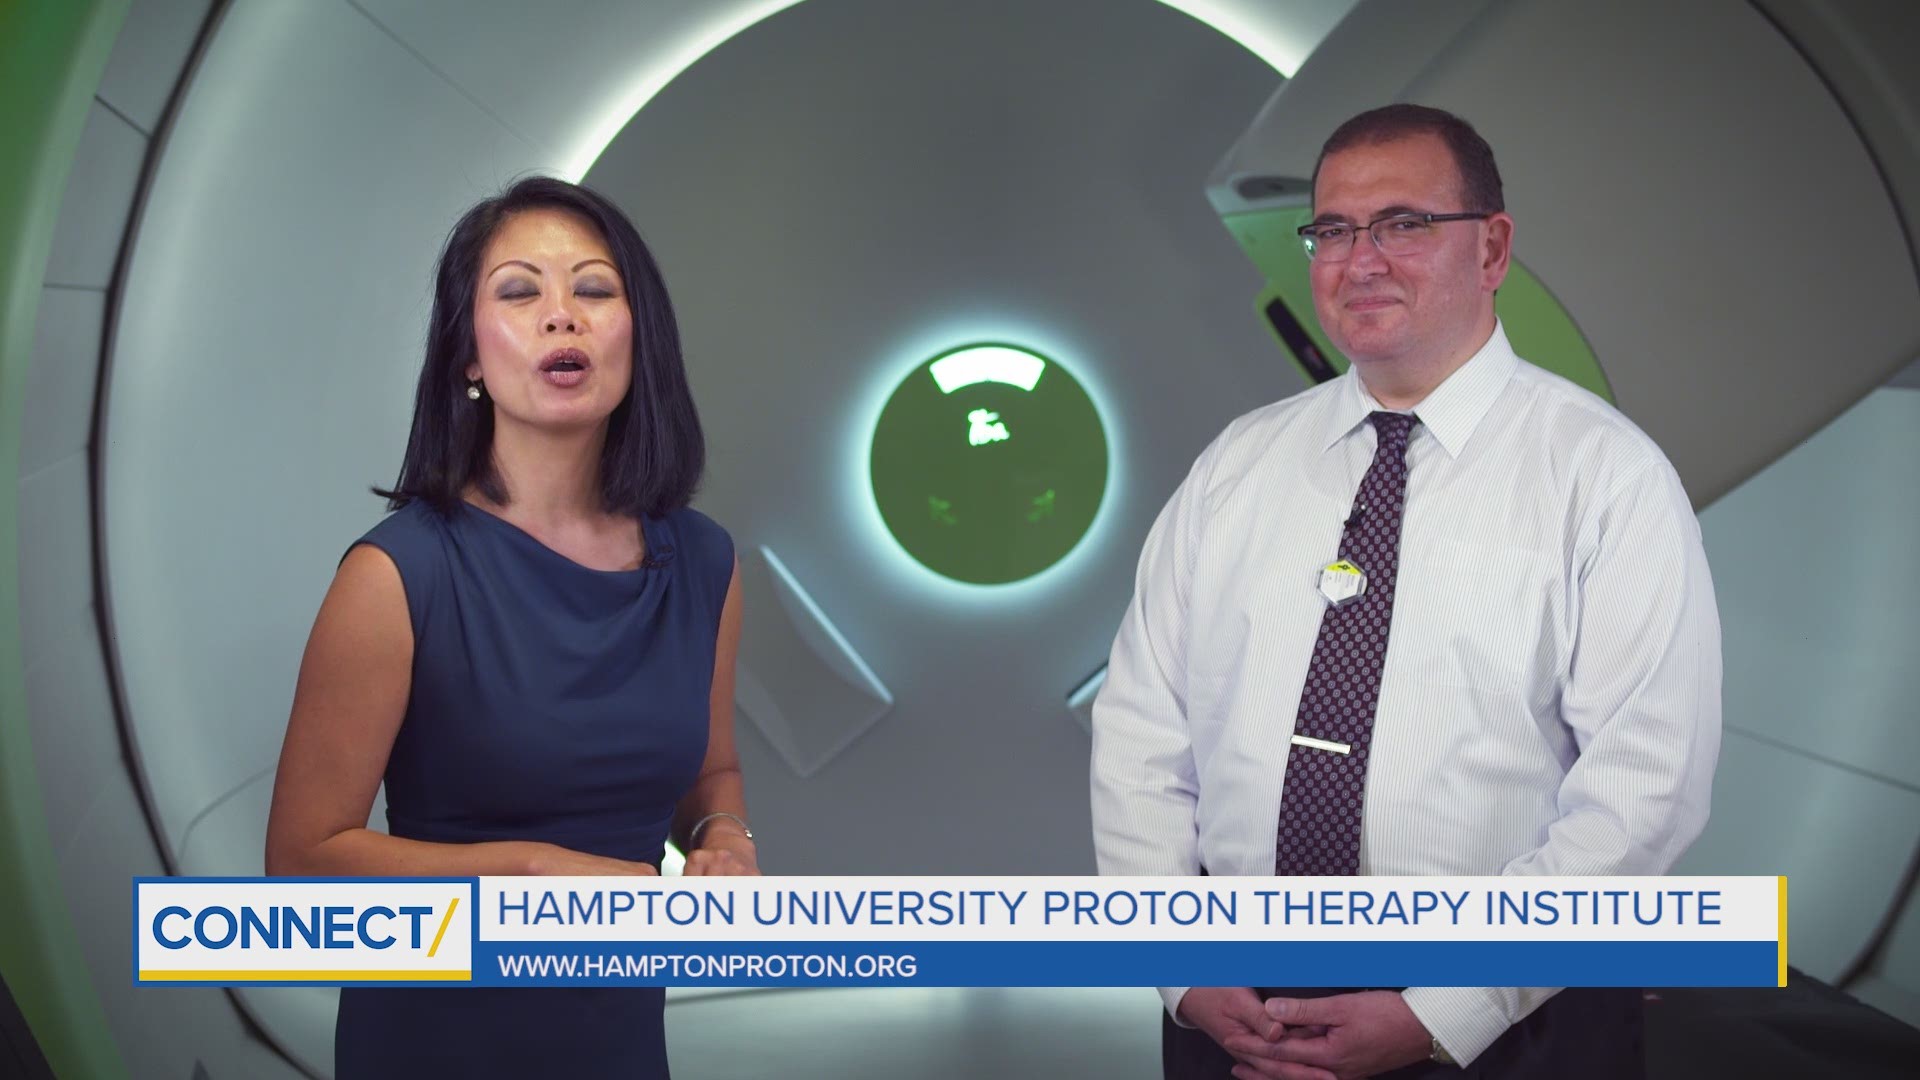 When it comes to treating cancer, traditional chemotherapy and radiation aren't the only options. There is a proton therapy center right here in Hampton Roads.